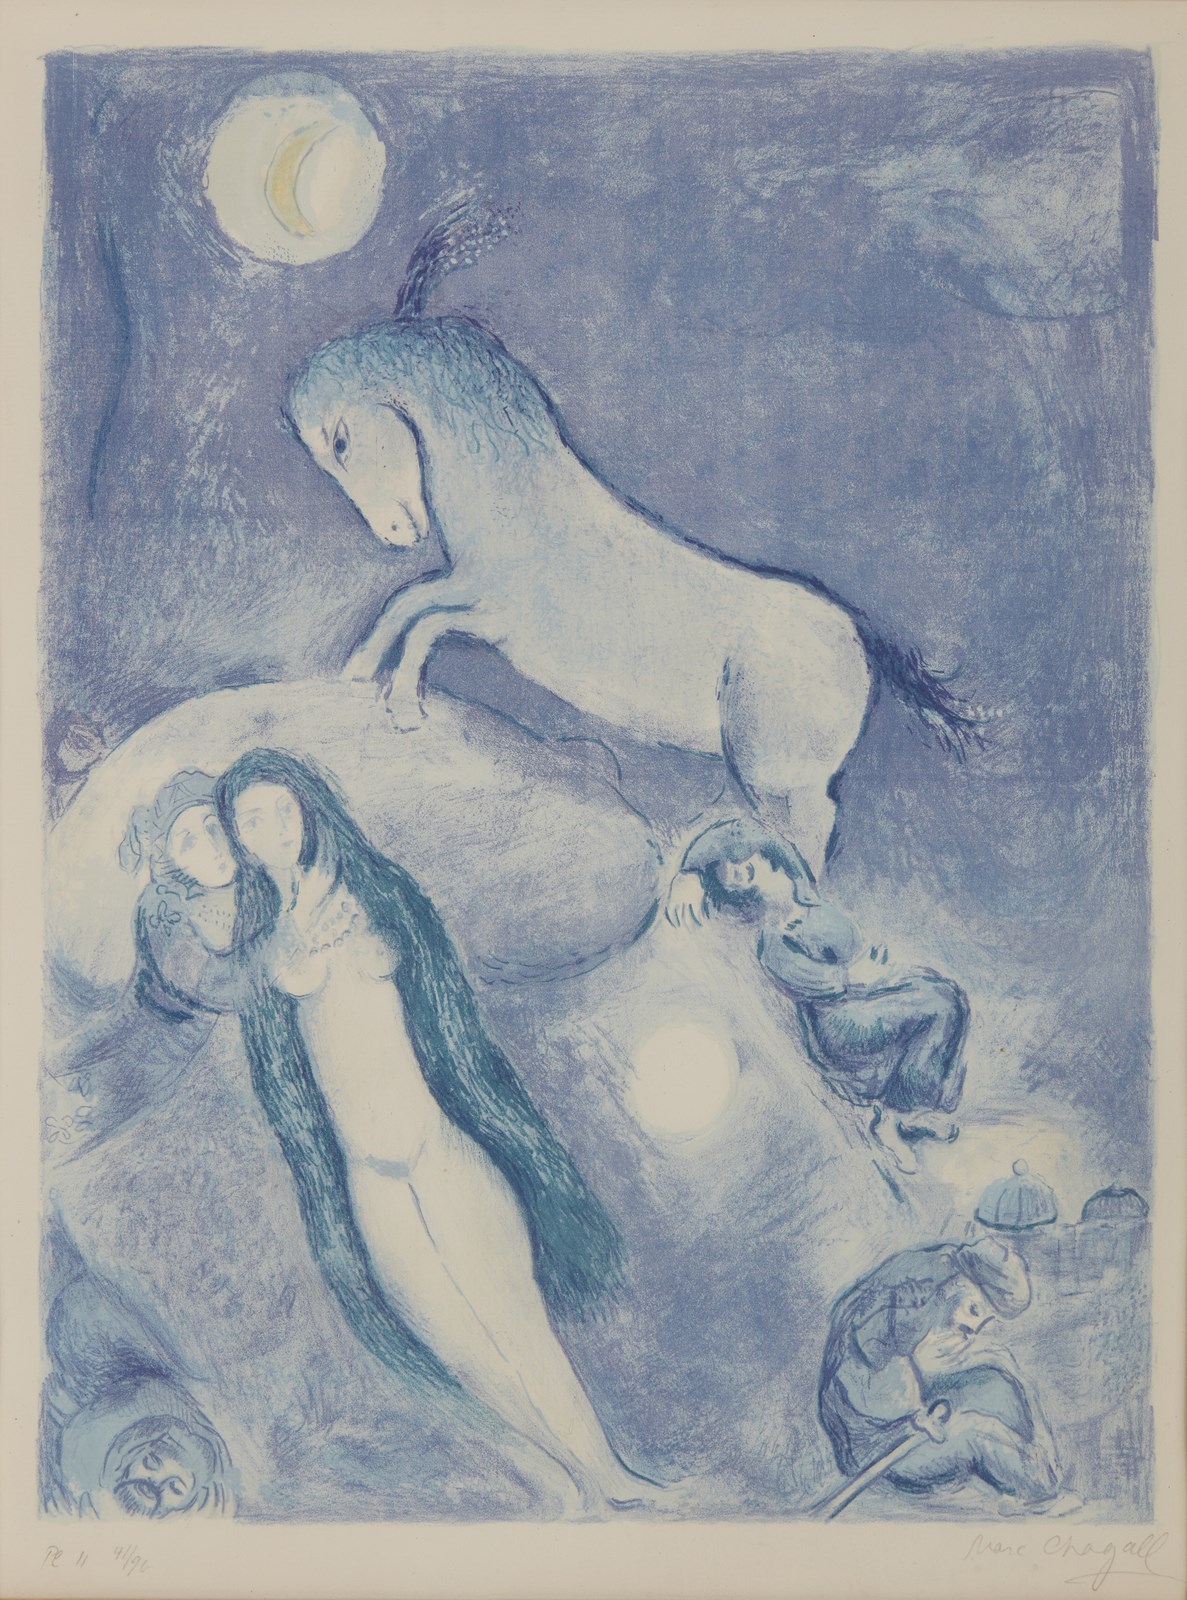 Plate 11 from Four Tales From The Arabian Nights. He went up to the couch and found a young lady asleep.... (Marc Chagall)